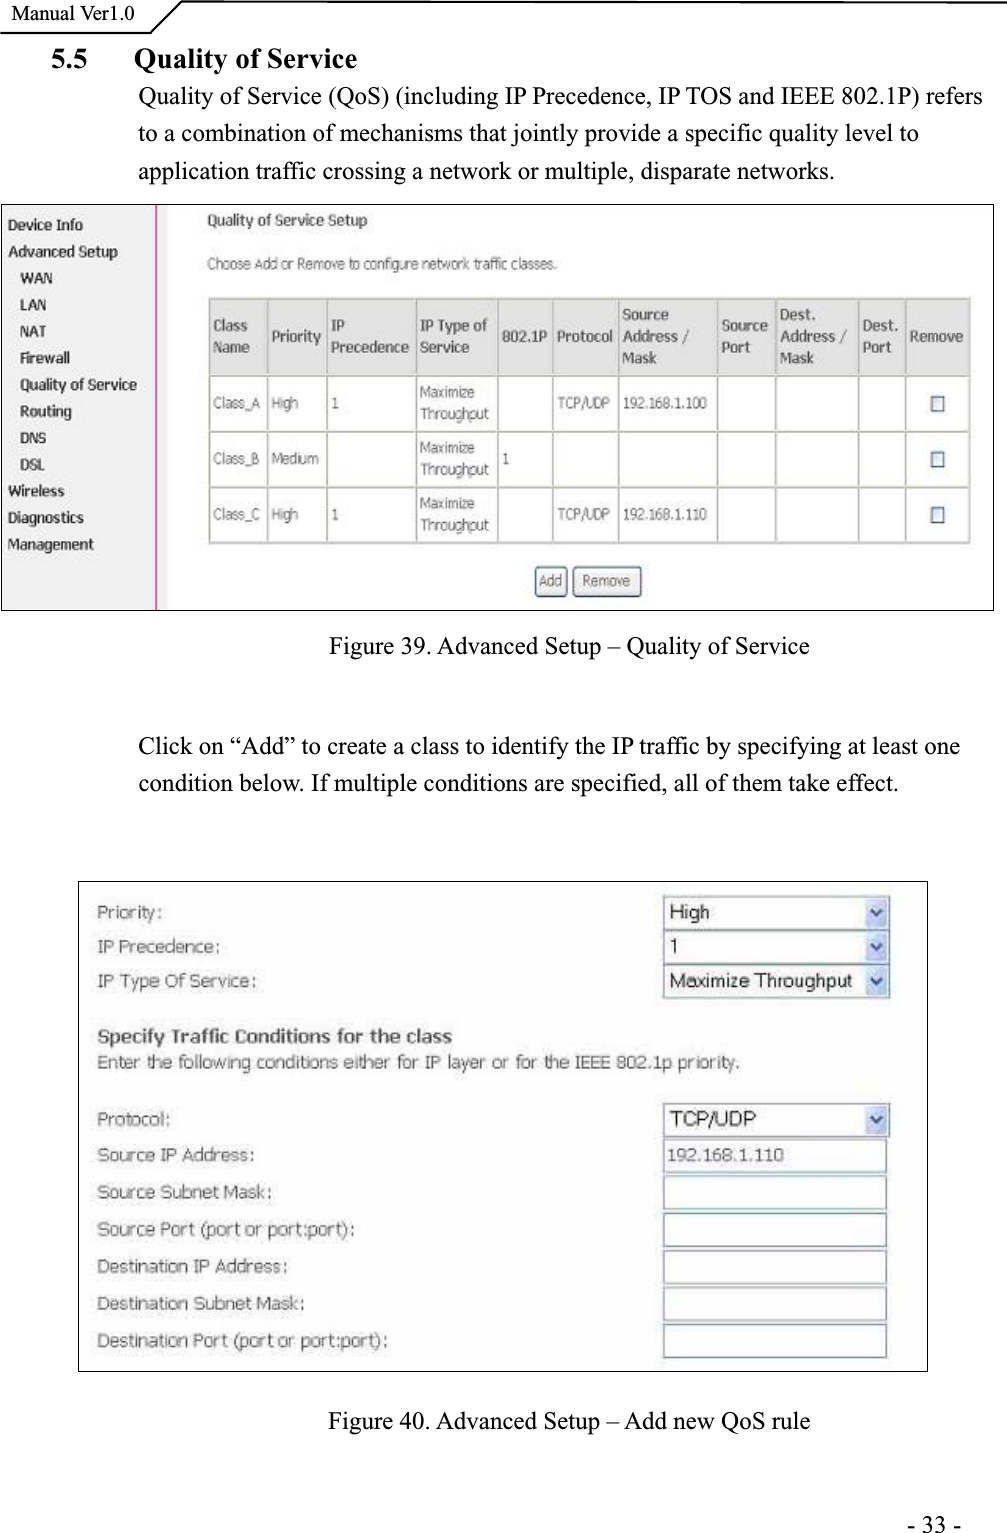  Manual Ver1.05.5 Quality of Service Quality of Service (QoS) (including IP Precedence, IP TOS and IEEE 802.1P) refers to a combination of mechanisms that jointly provide a specific quality level to application traffic crossing a network or multiple, disparate networks. Figure 39. Advanced Setup – Quality of Service Click on “Add” to create a class to identify the IP traffic by specifying at least one condition below. If multiple conditions are specified, all of them take effect.Figure 40. Advanced Setup – Add new QoS rule                                                                      -33-